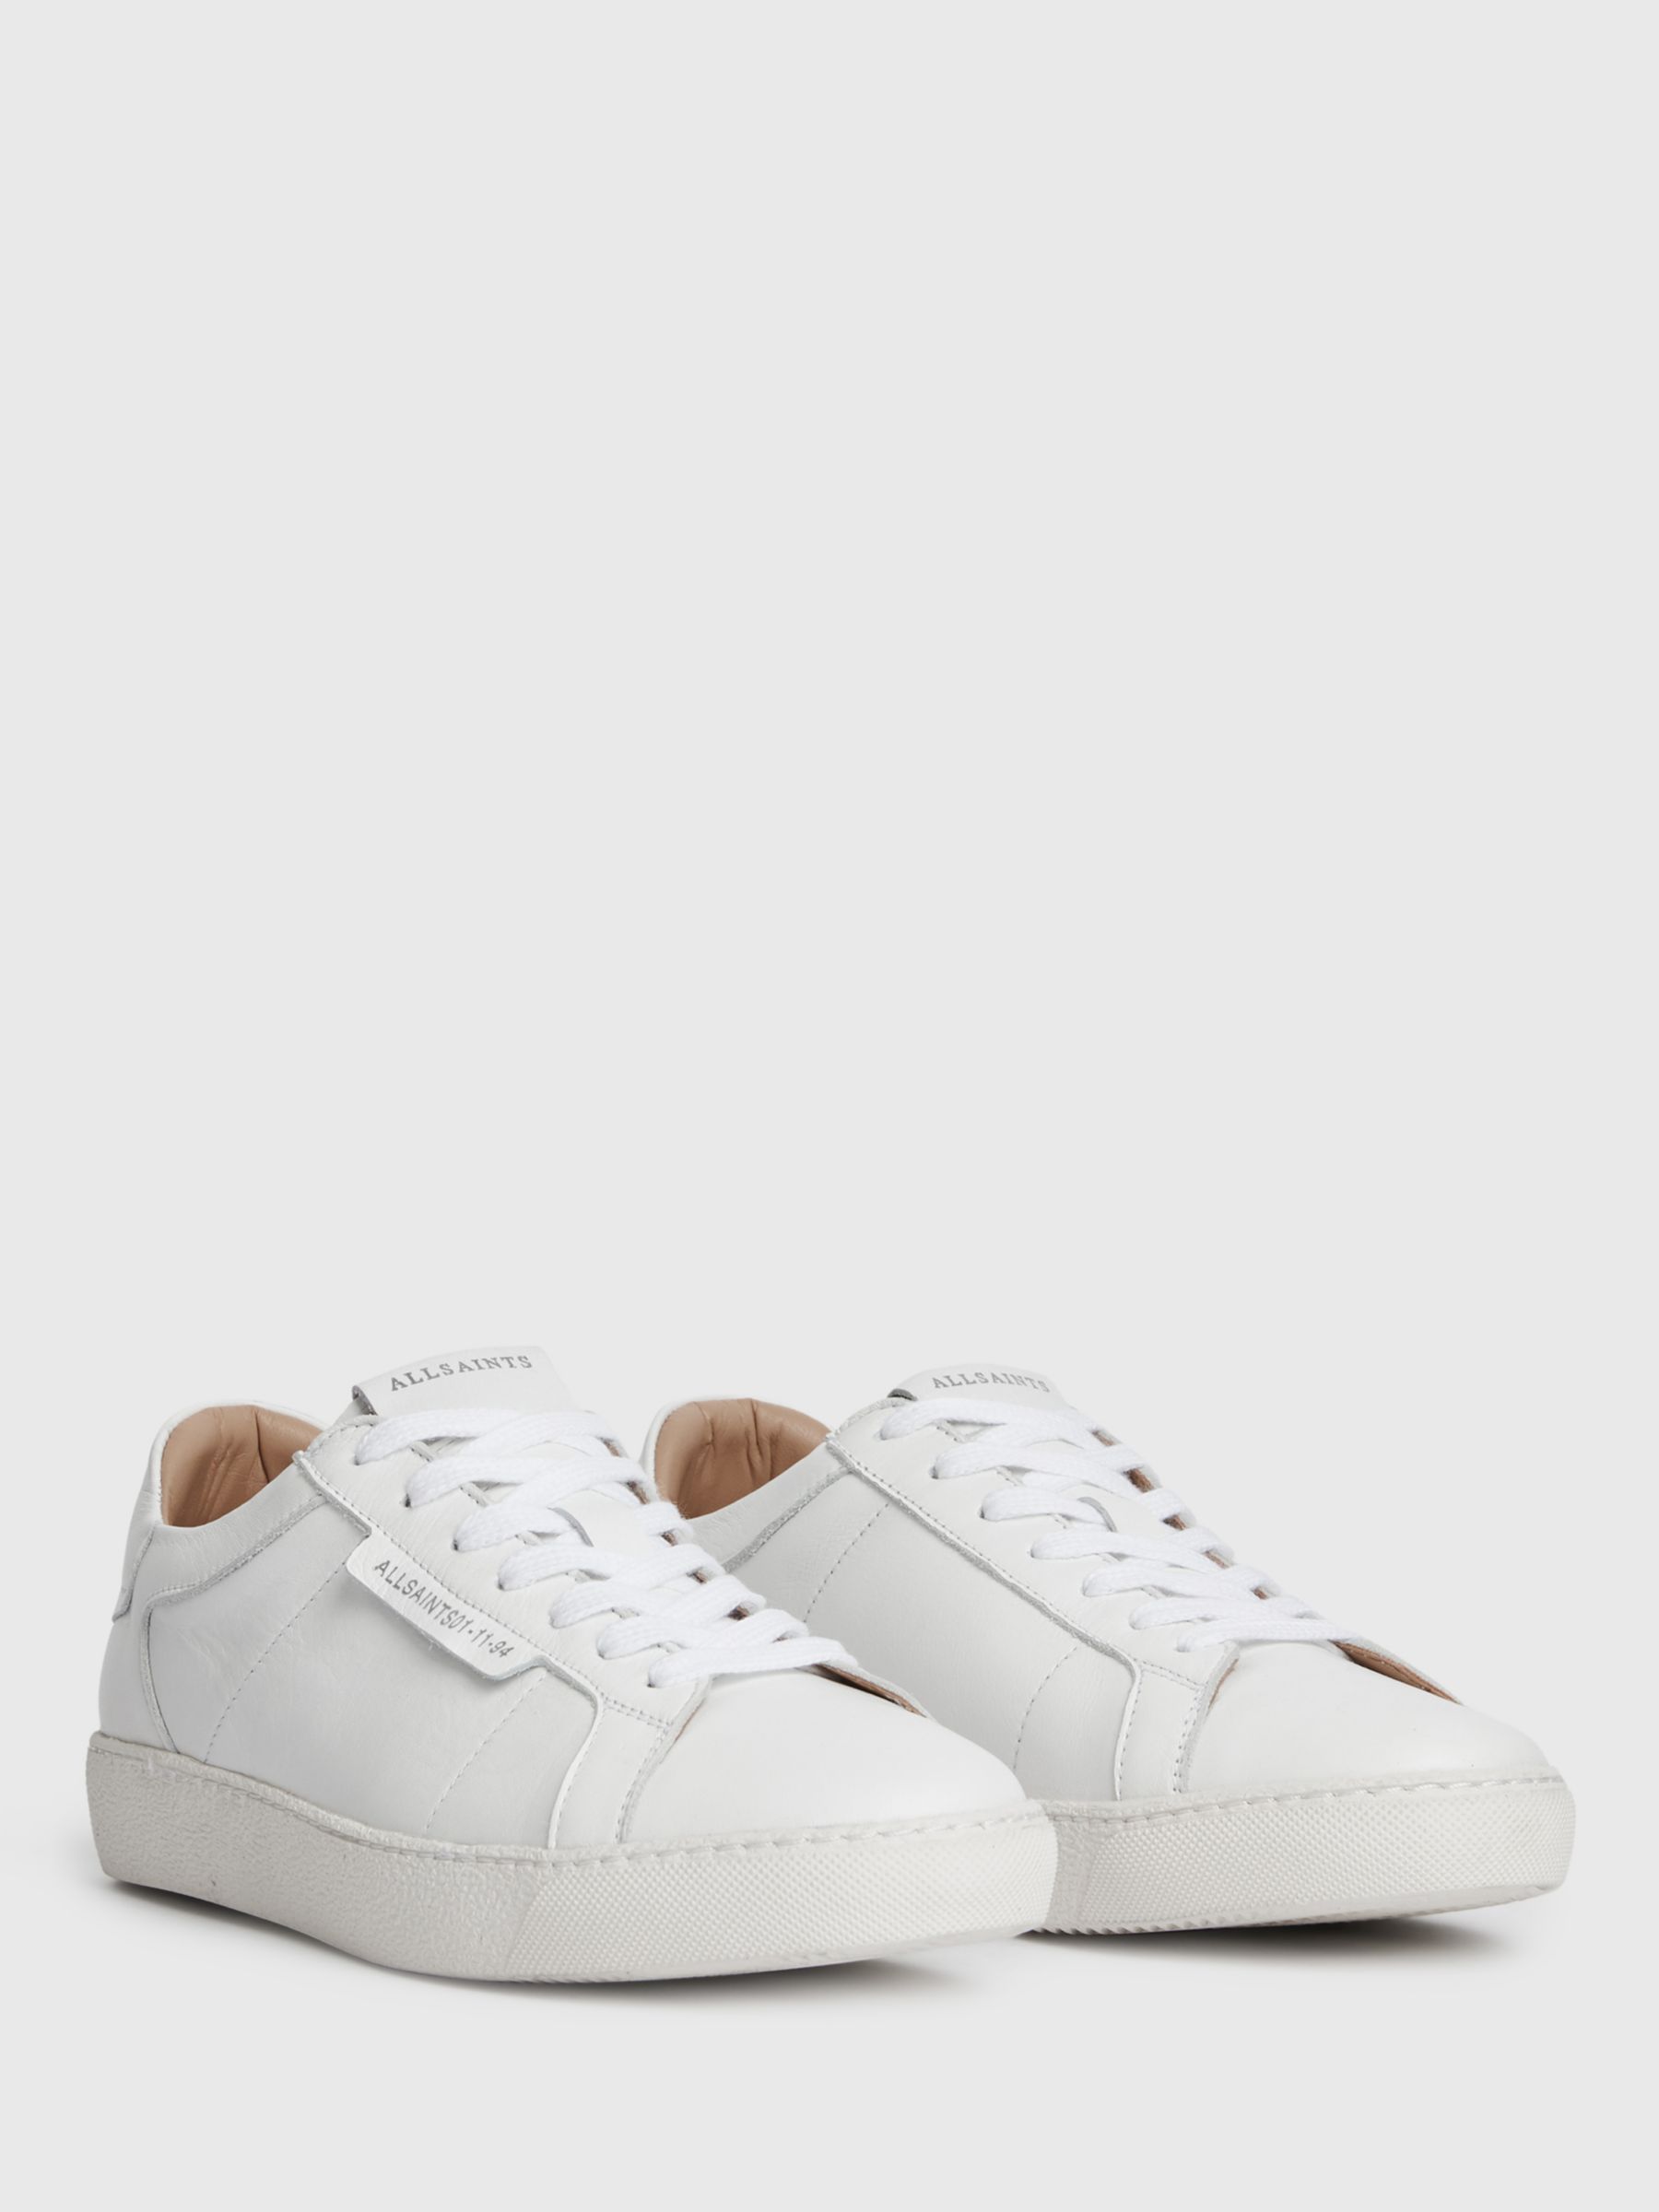 AllSaints Sheer Low Leather Trainers, White, White, 6